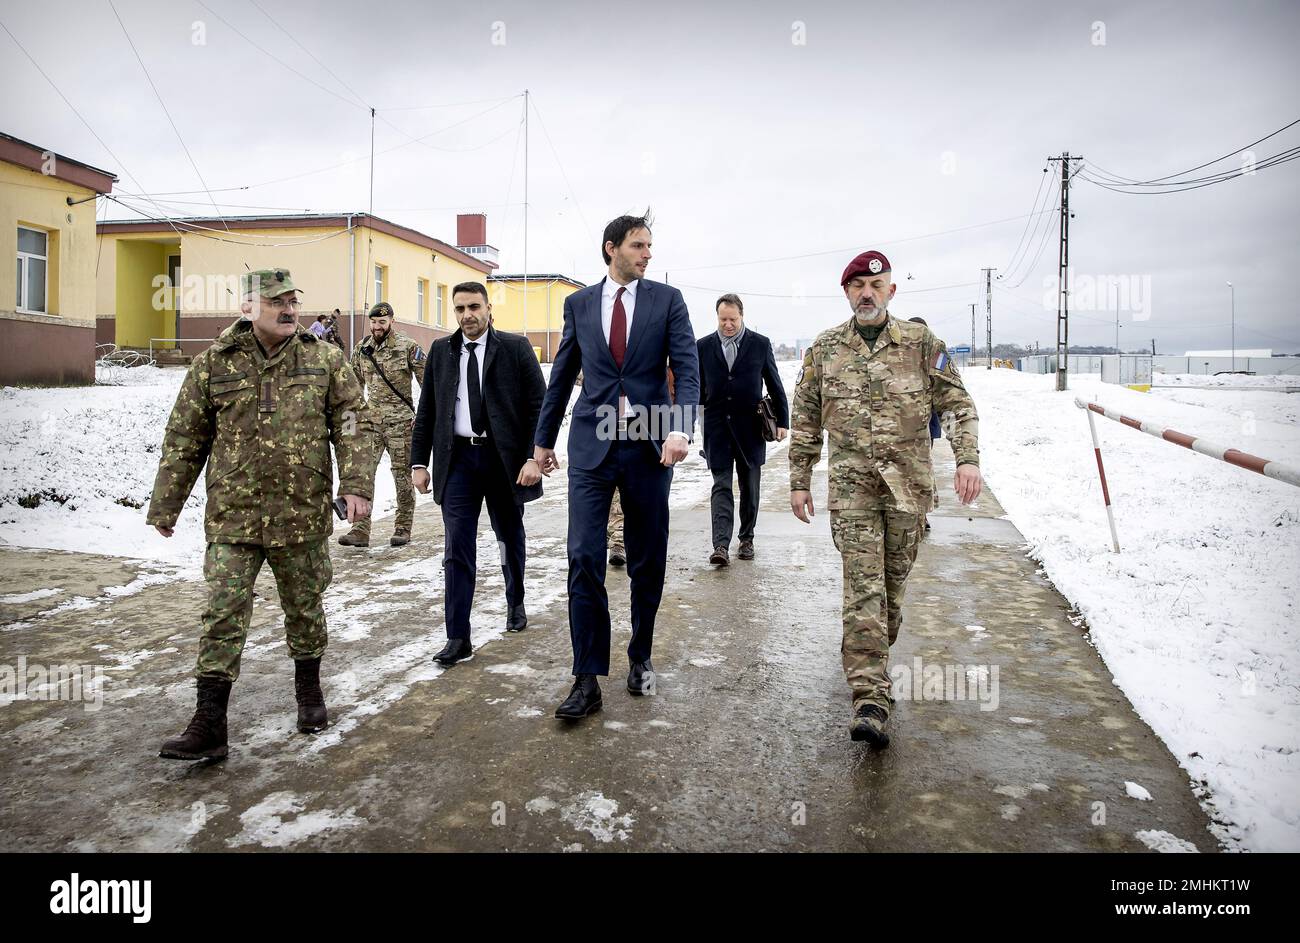 CINCU - Minister Wopke Hoekstra of Foreign Affairs visits Dutch troops that  are part of the French-led NATO Battle Group. The Netherlands has stationed  soldiers in Romania to help strengthen the eastern